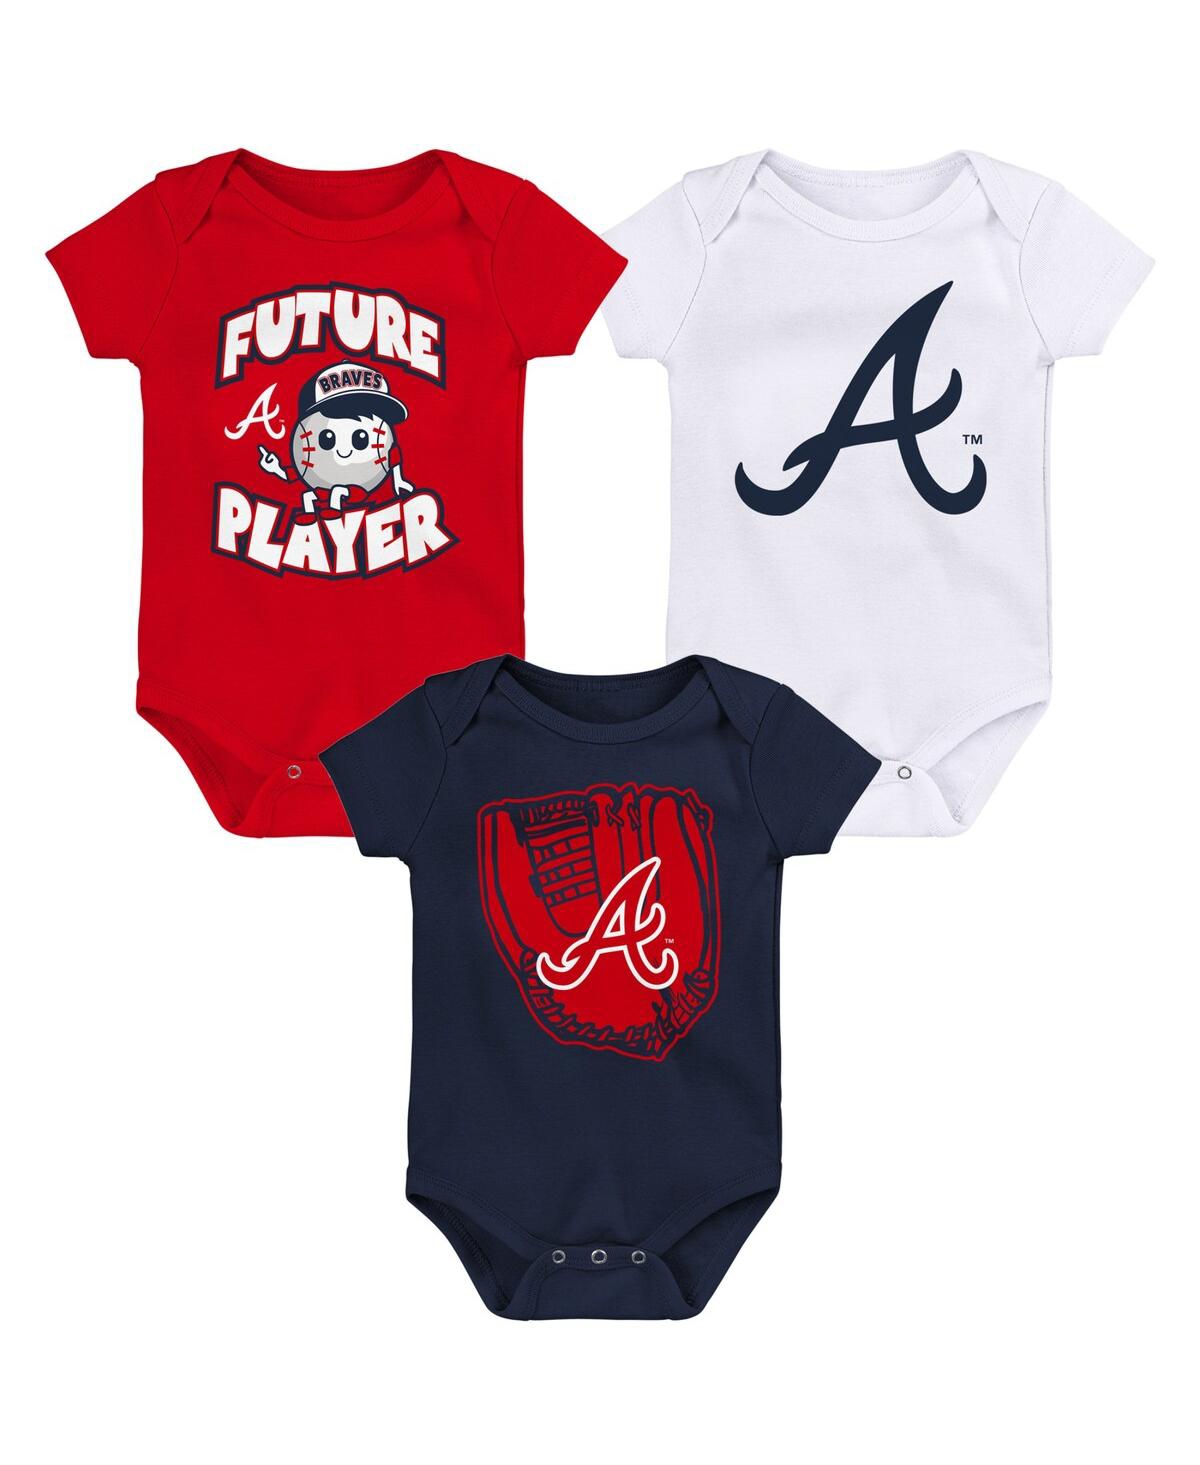 Outerstuff Babies' Newborn And Infant Boys And Girls Red, Navy, White Atlanta Braves Minor League Player Three-pack Bod In Red,navy,white